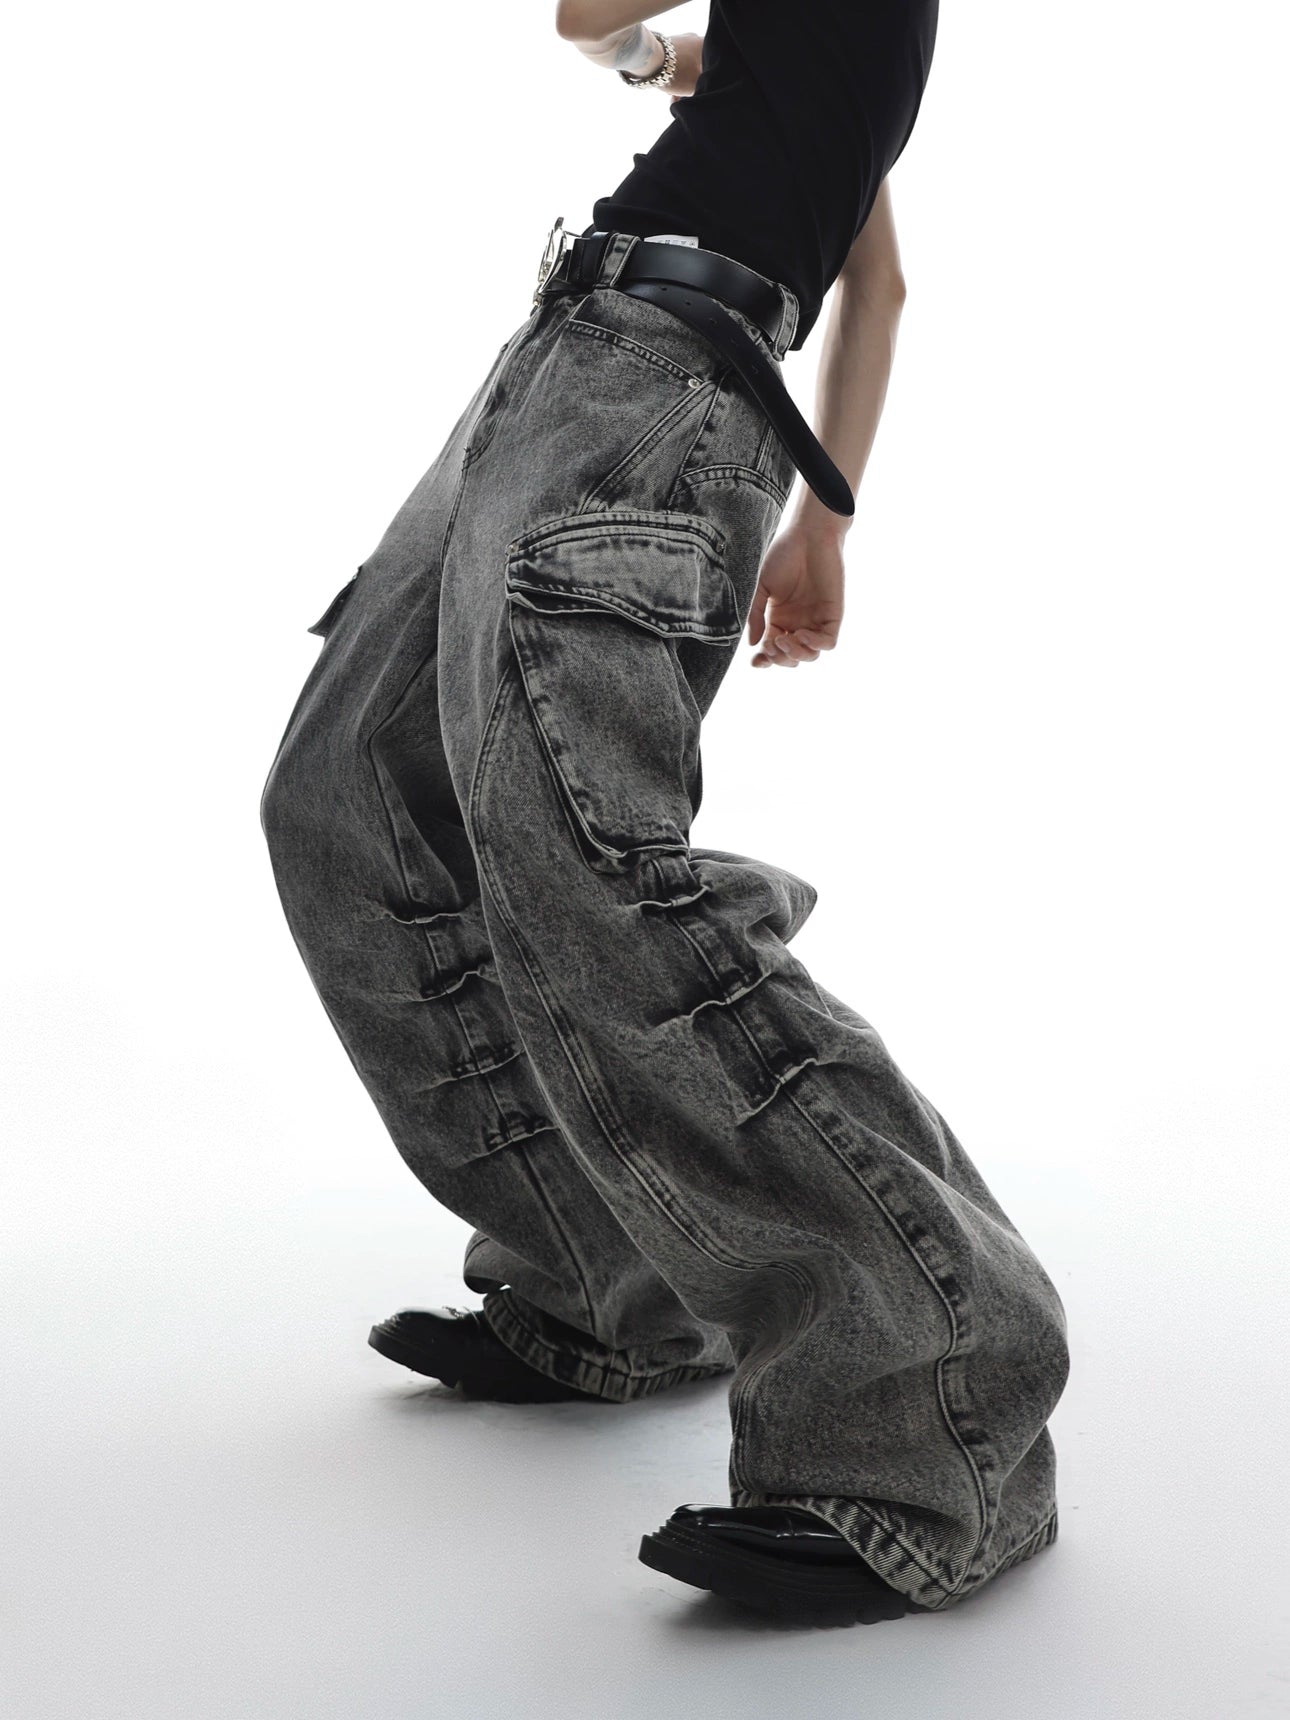 CulturE Minority Heavy Industry Wrinkle Washed Micro Horn Jeans Large Pocket Design Casual Wide Leg Pants Men